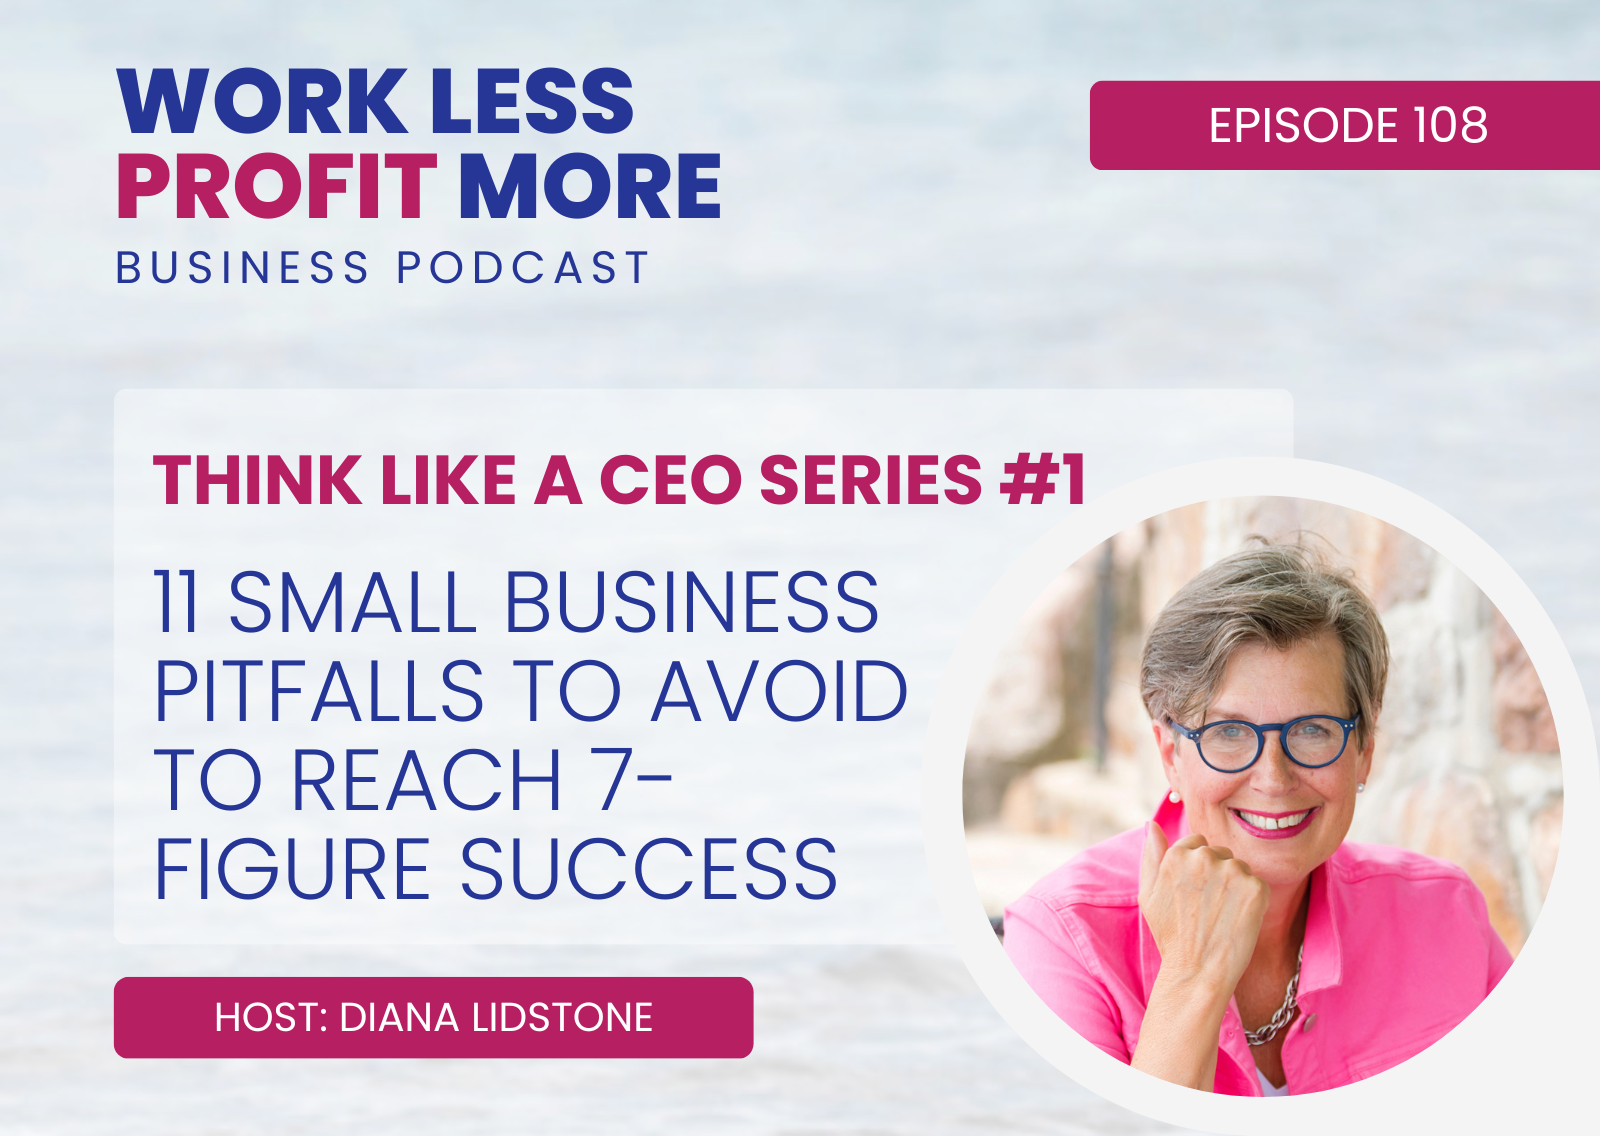 11 Small Business Pitfalls to Avoid to Reach 7-Figure Success (THINK LIKE A CEO series #1)